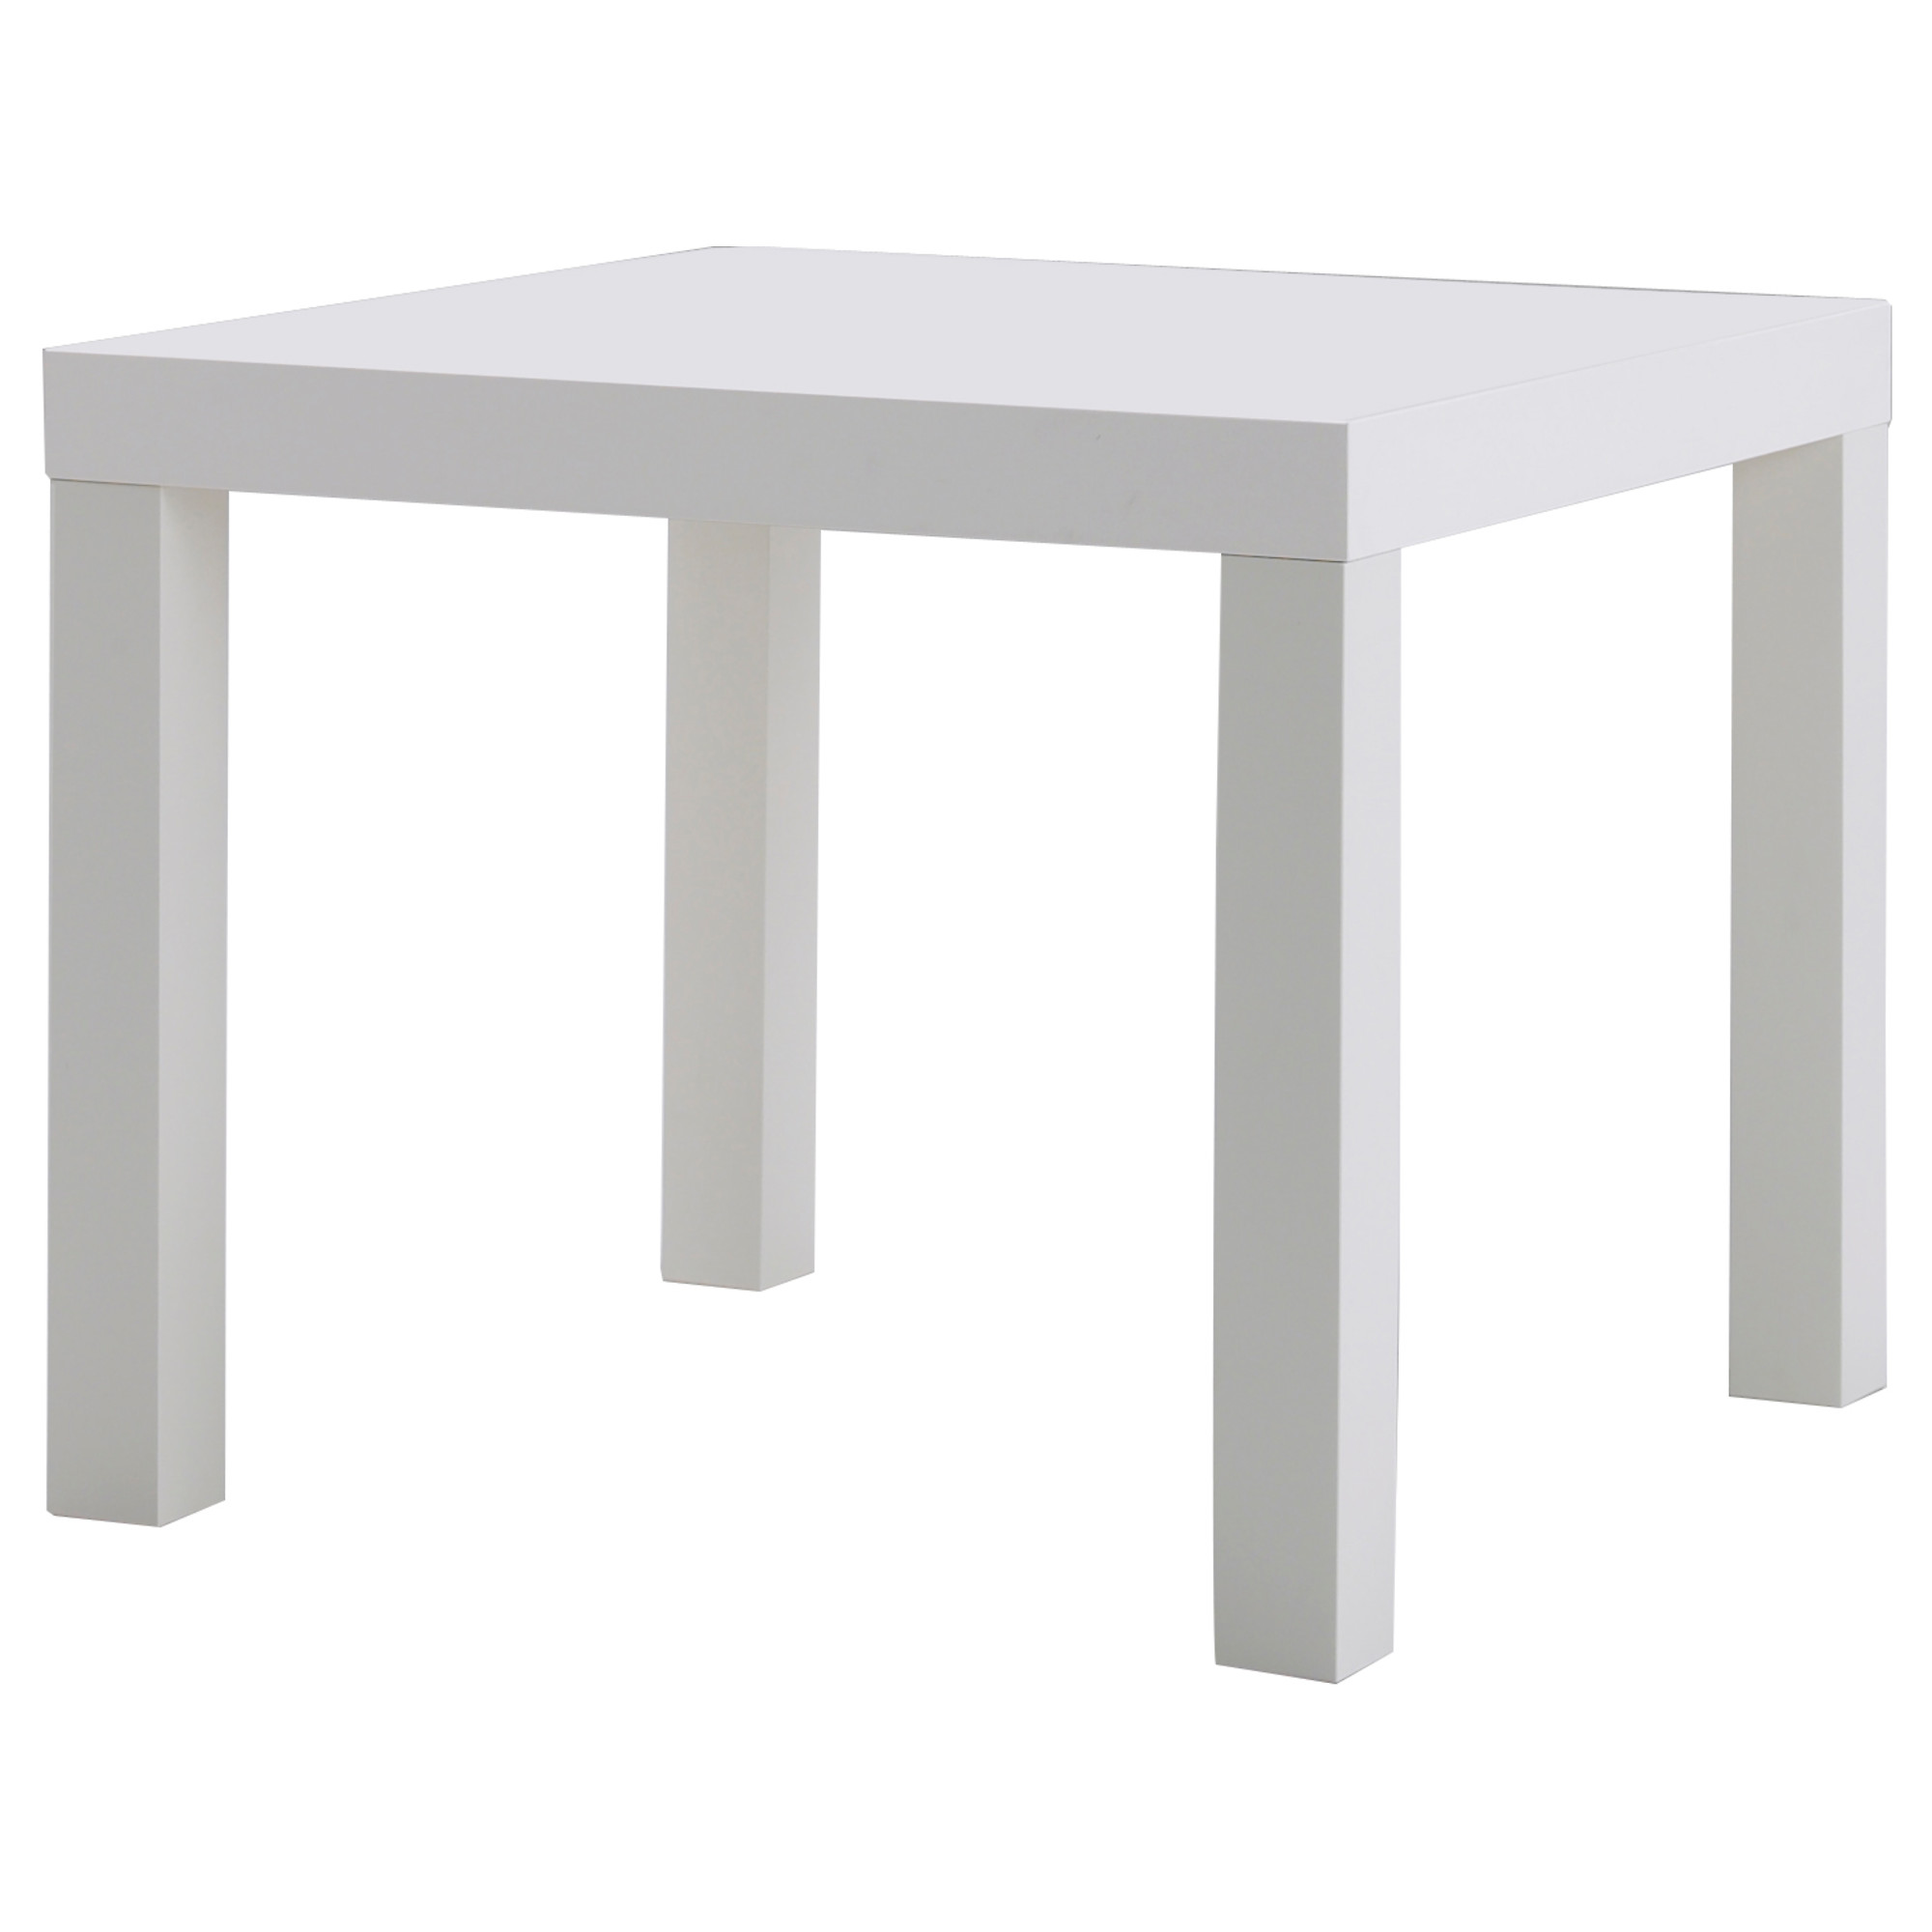 Lounge Coffee Table - White